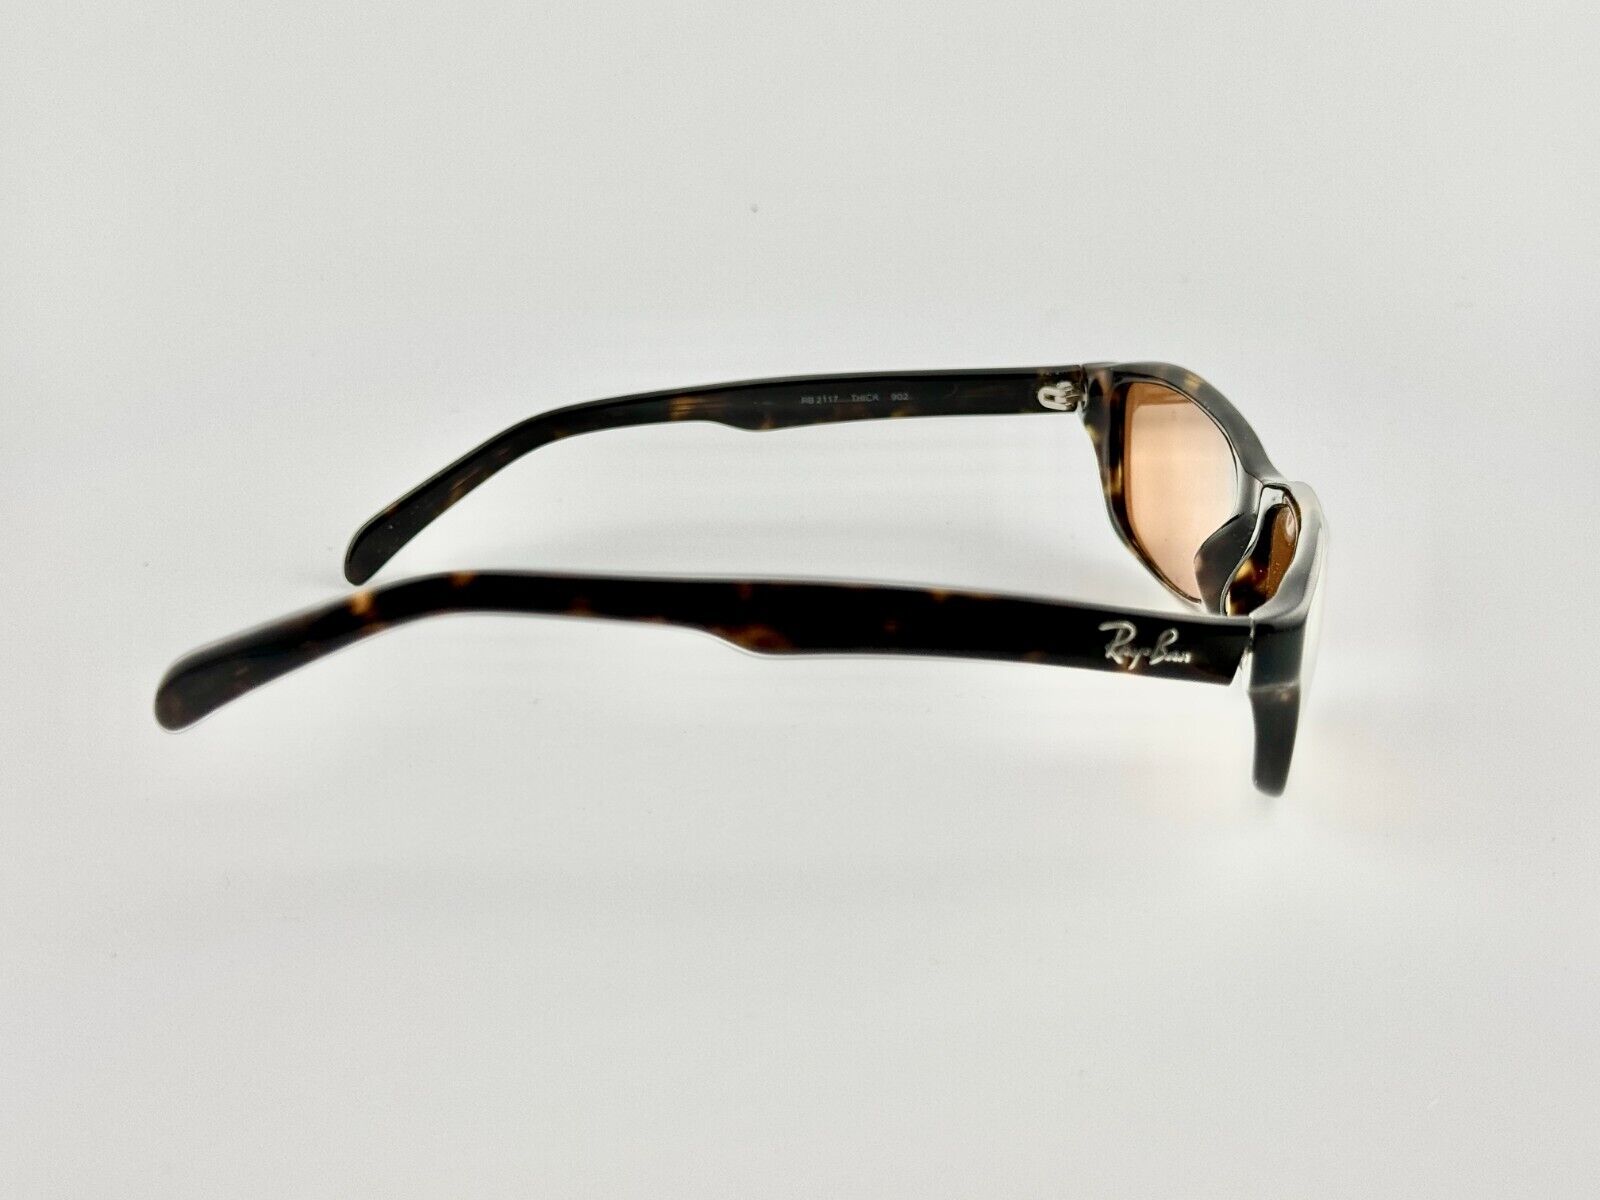 Ray Ban RB2117 Thick 902 Sunglasses Frames - image 5